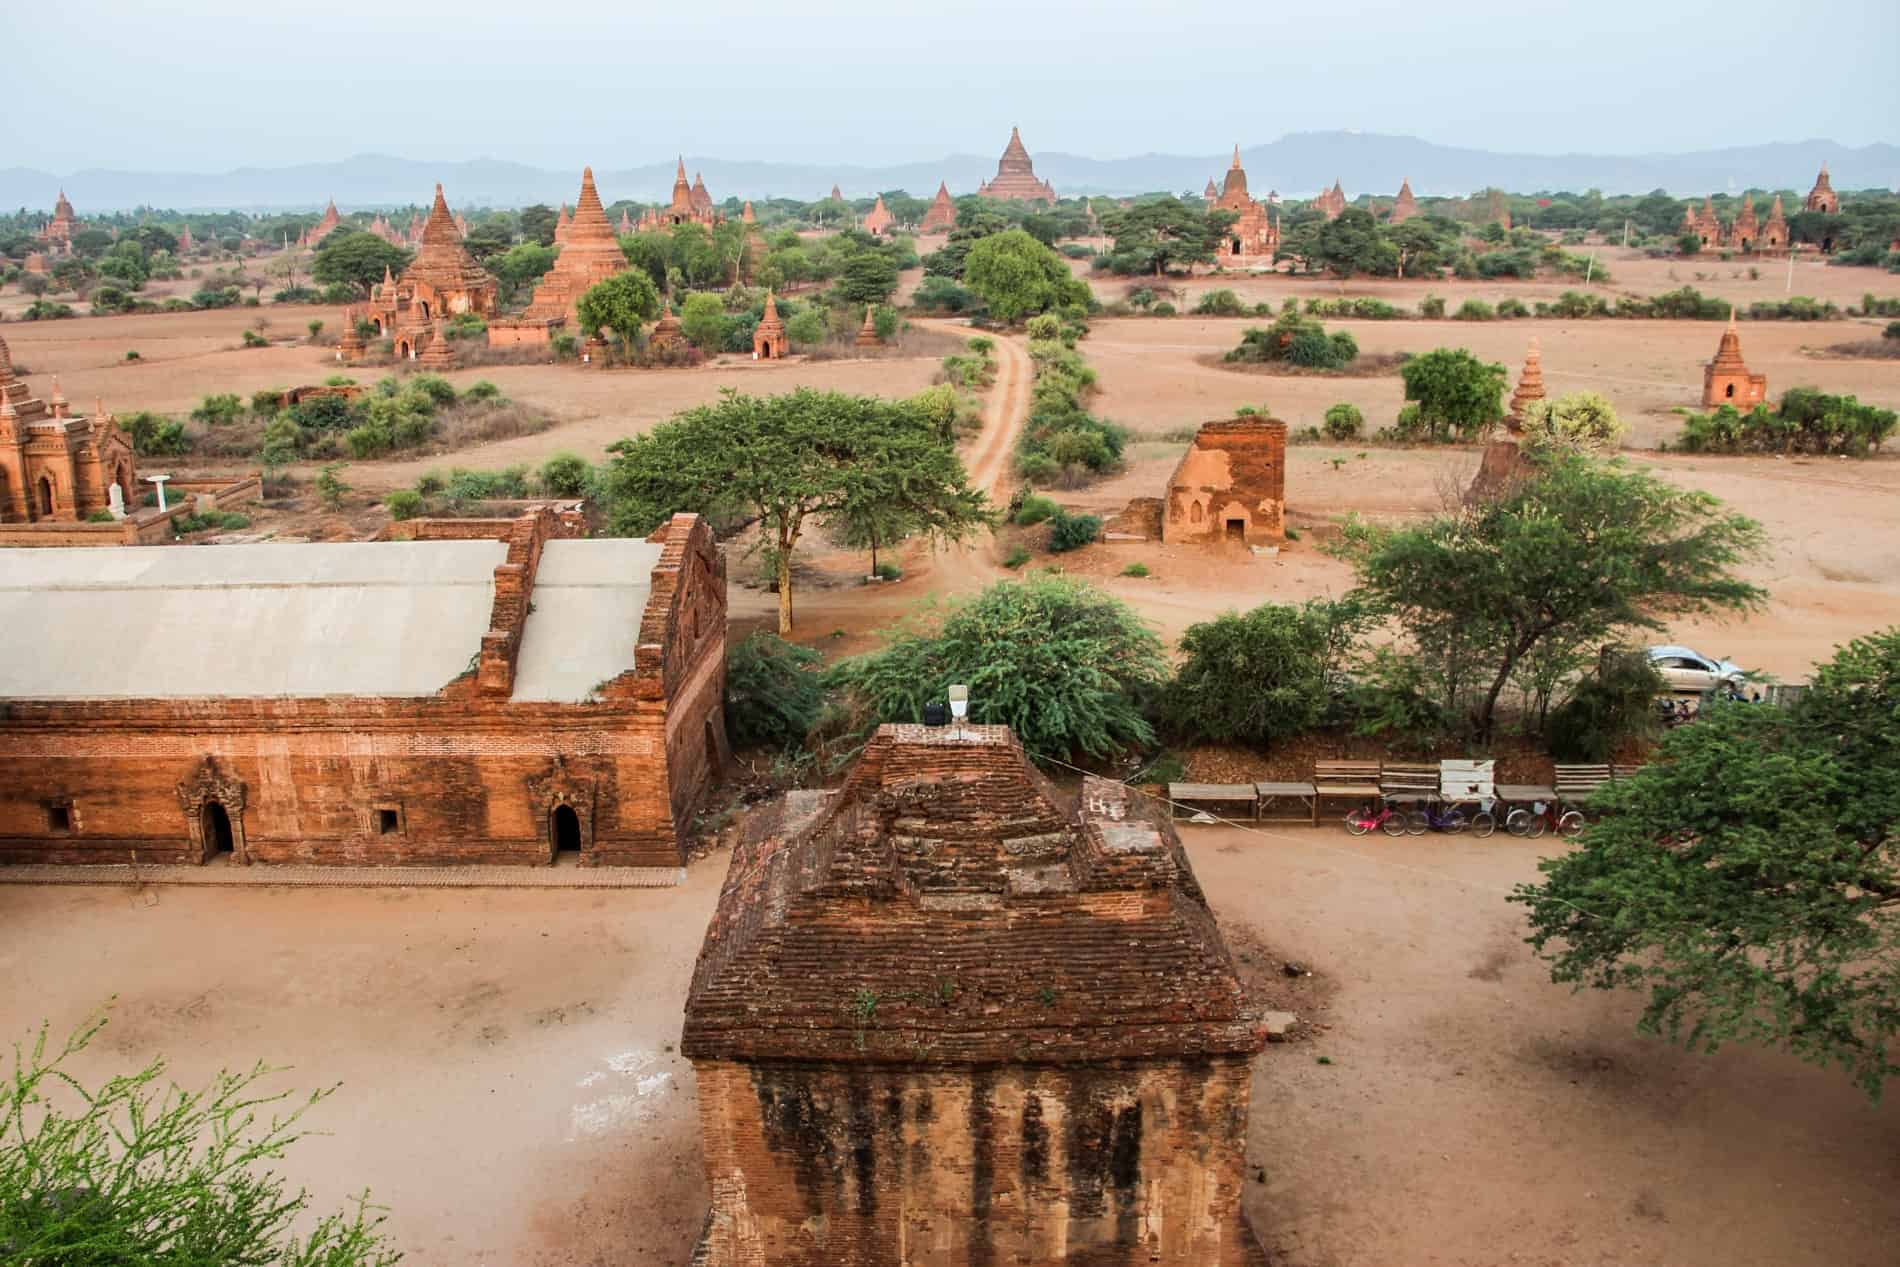 A ochre plain scattered with trees and dozens of orange brick temples with pointed stupas.